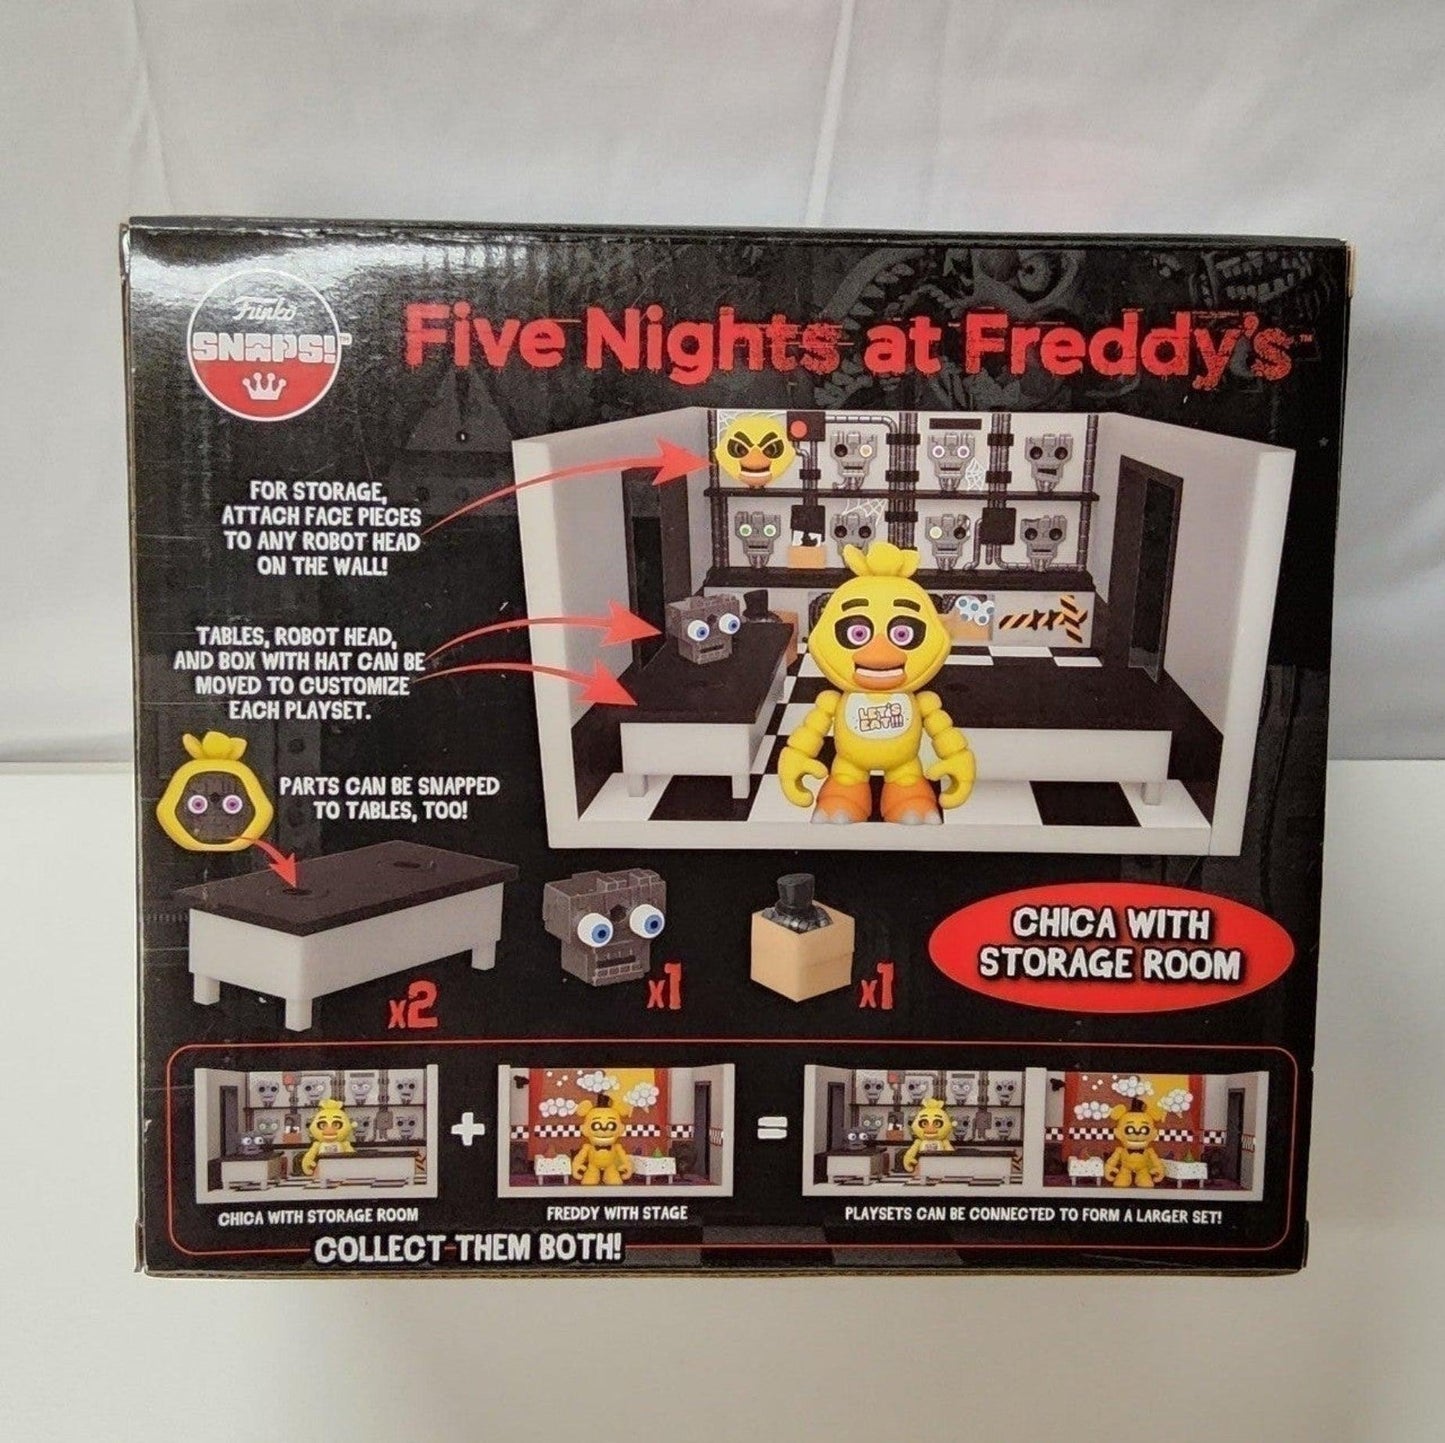 Funko Snaps! FNAF Five Nights at Freddy's Chica 11 Piece FNAF Playset - Logan's Toy Chest